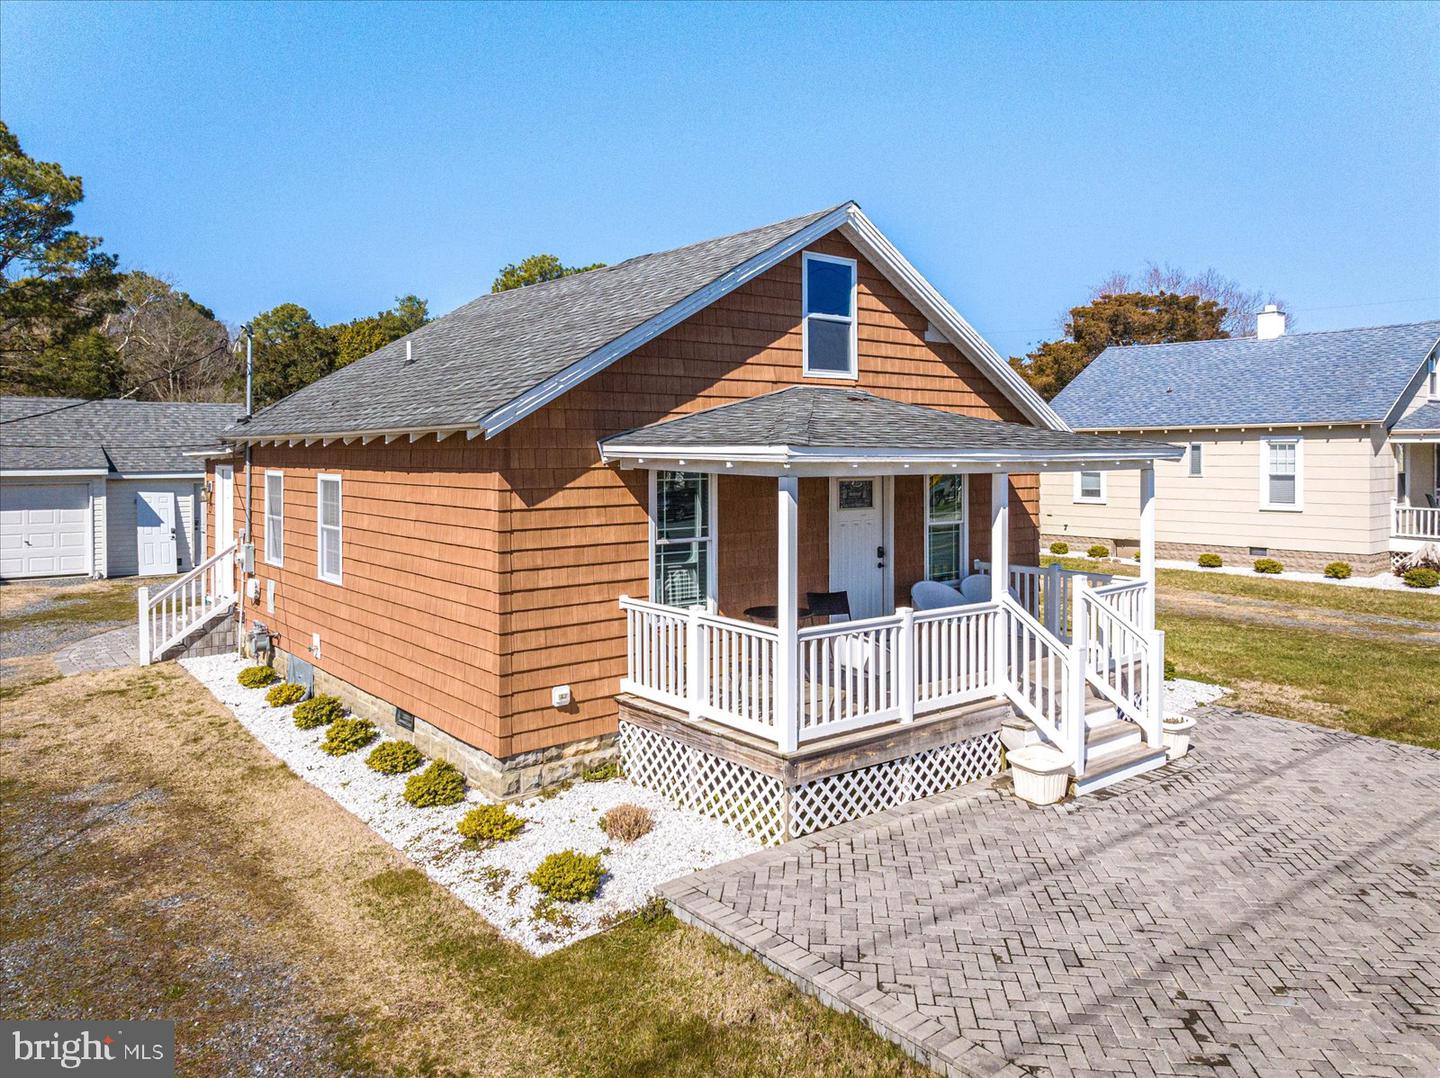 MDWO2019110-802902588276-2024-03-05-14-03-43 9801/9805 Golf Course Rd | Ocean City, MD Real Estate For Sale | MLS# Mdwo2019110  - 1st Choice Properties